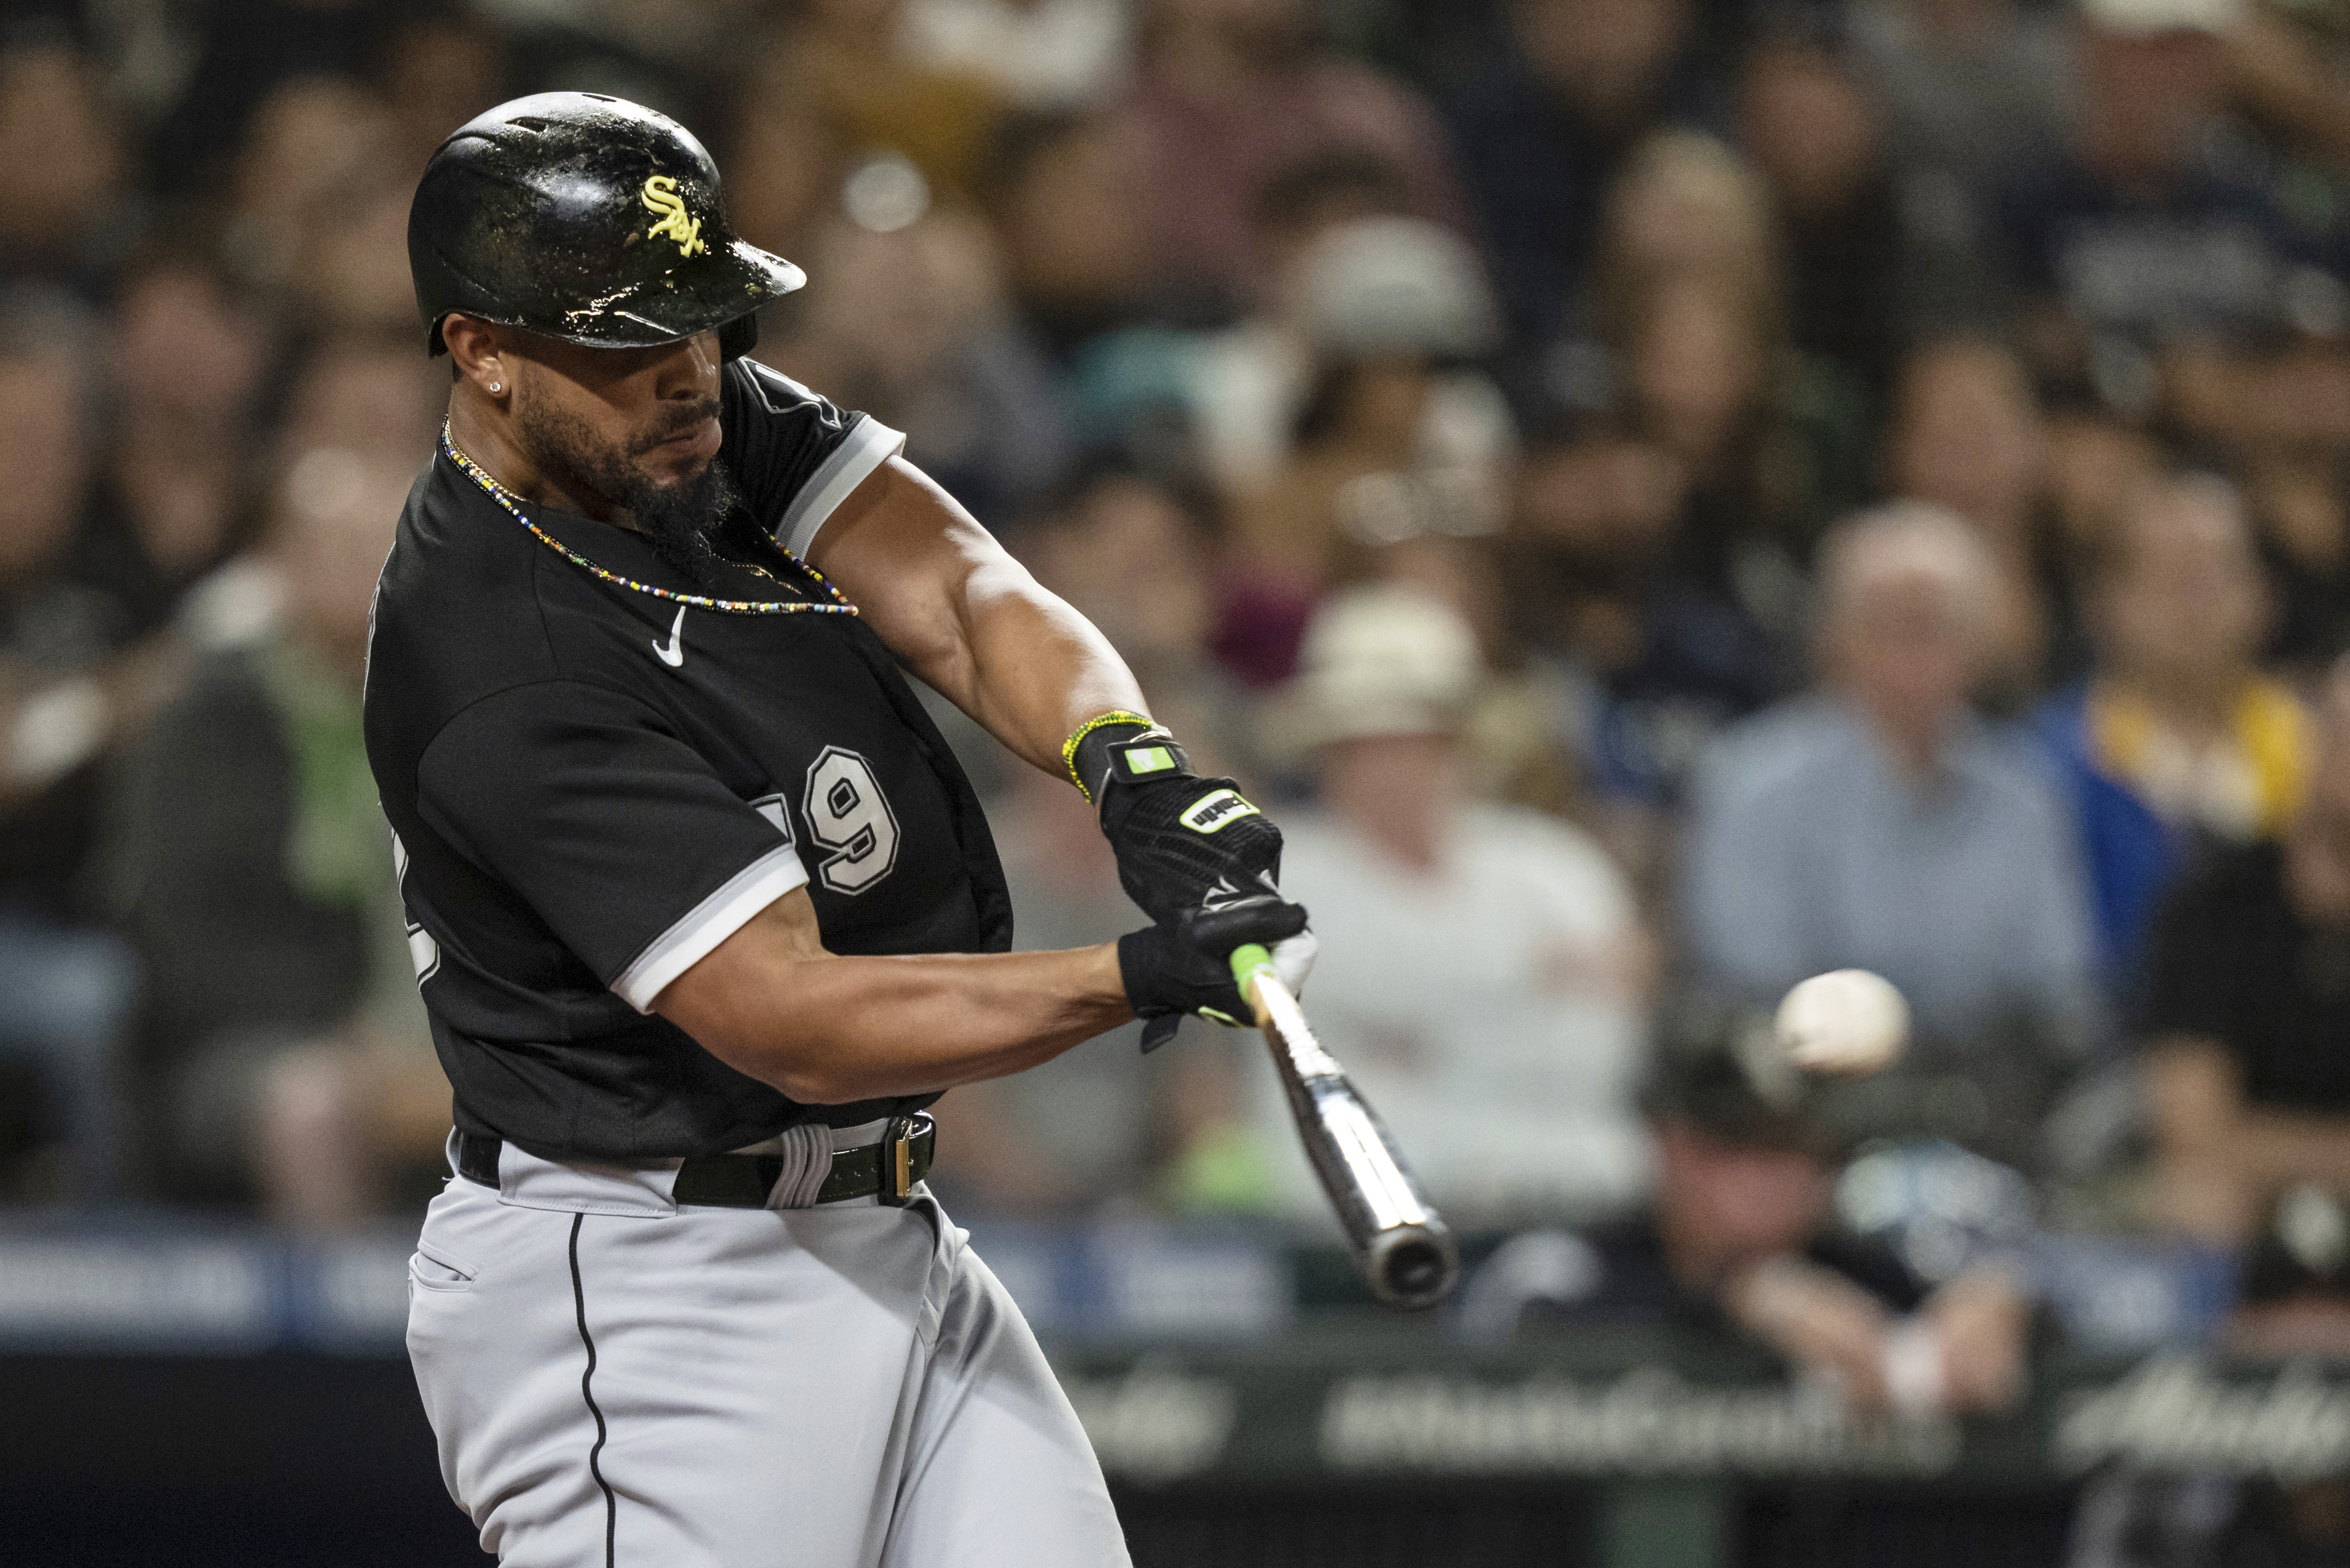 Astros sign free-agent first baseman Jose Abreu for 3 years, $58.5